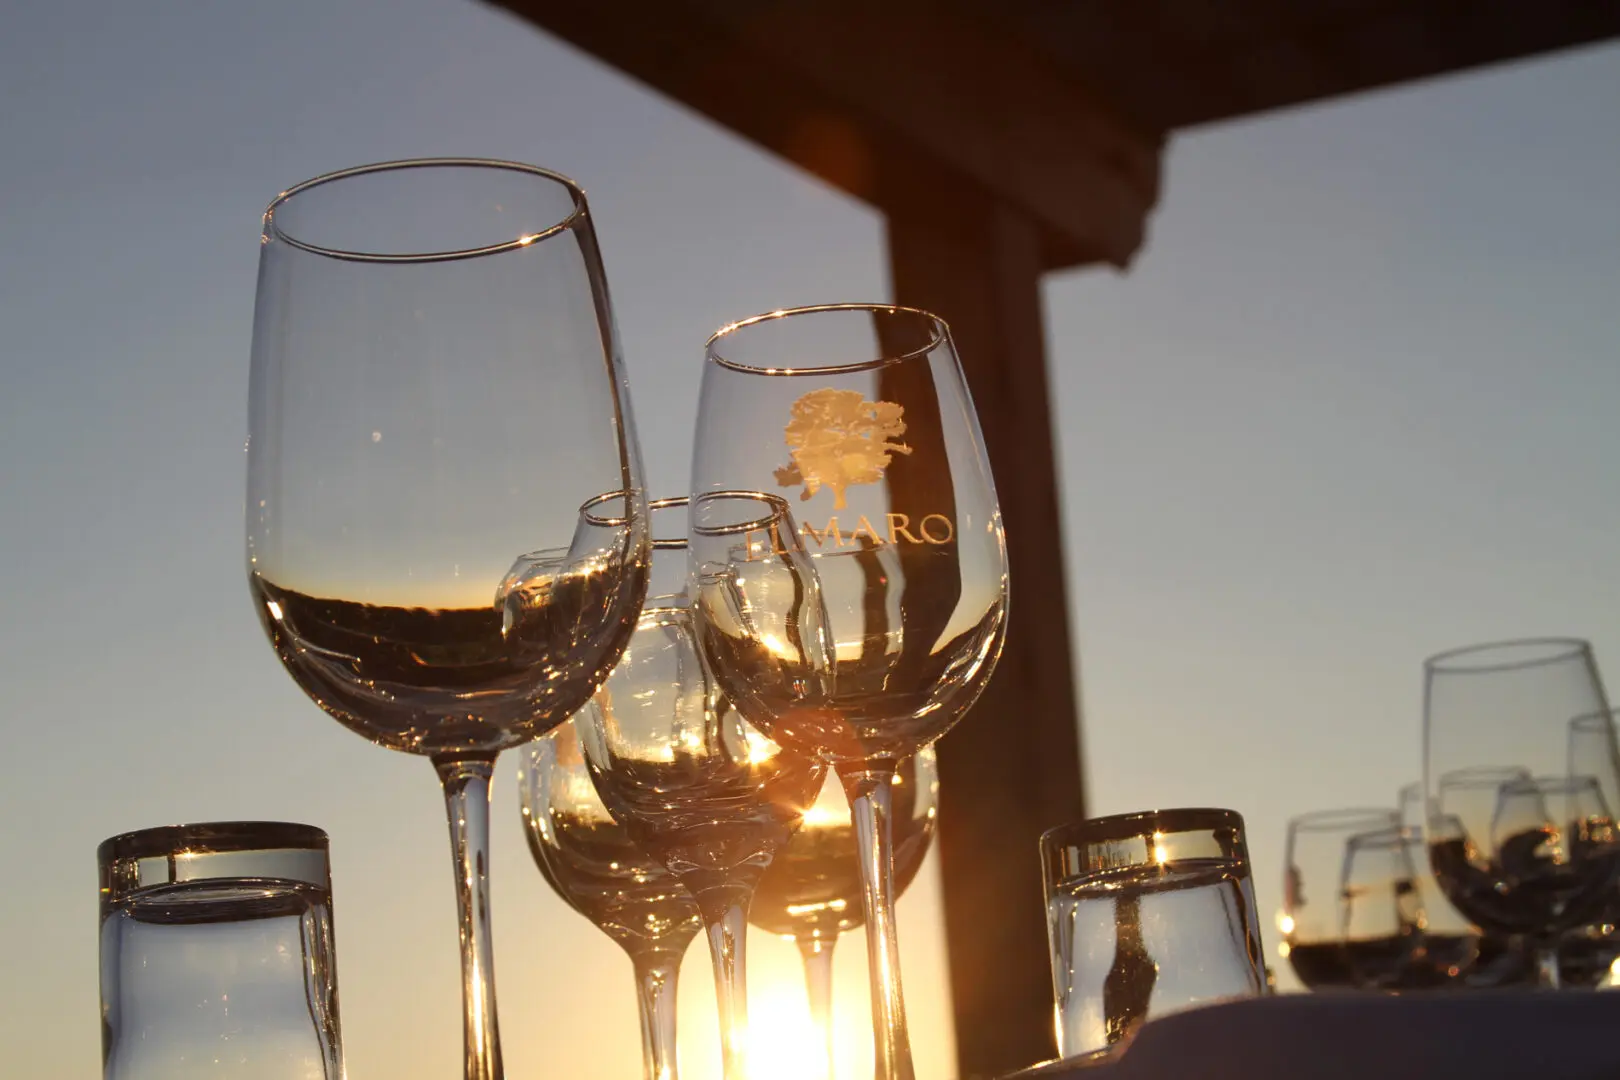 A group of wine glasses on a table at sunset.